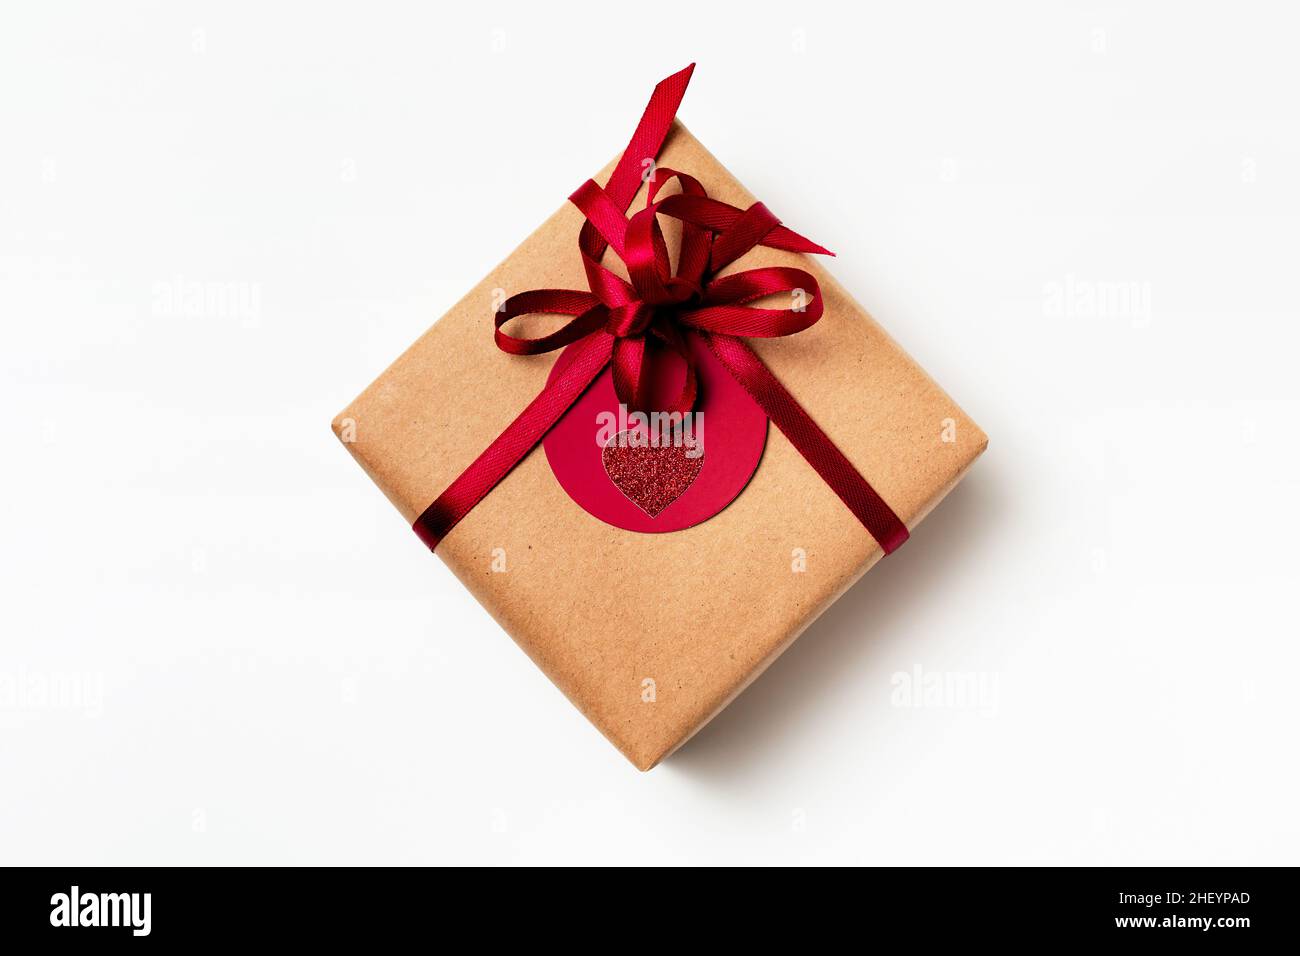 Elegant design of present gift box wrapped in brown craft paper with red ribbon and red tag, top view on white background Stock Photo